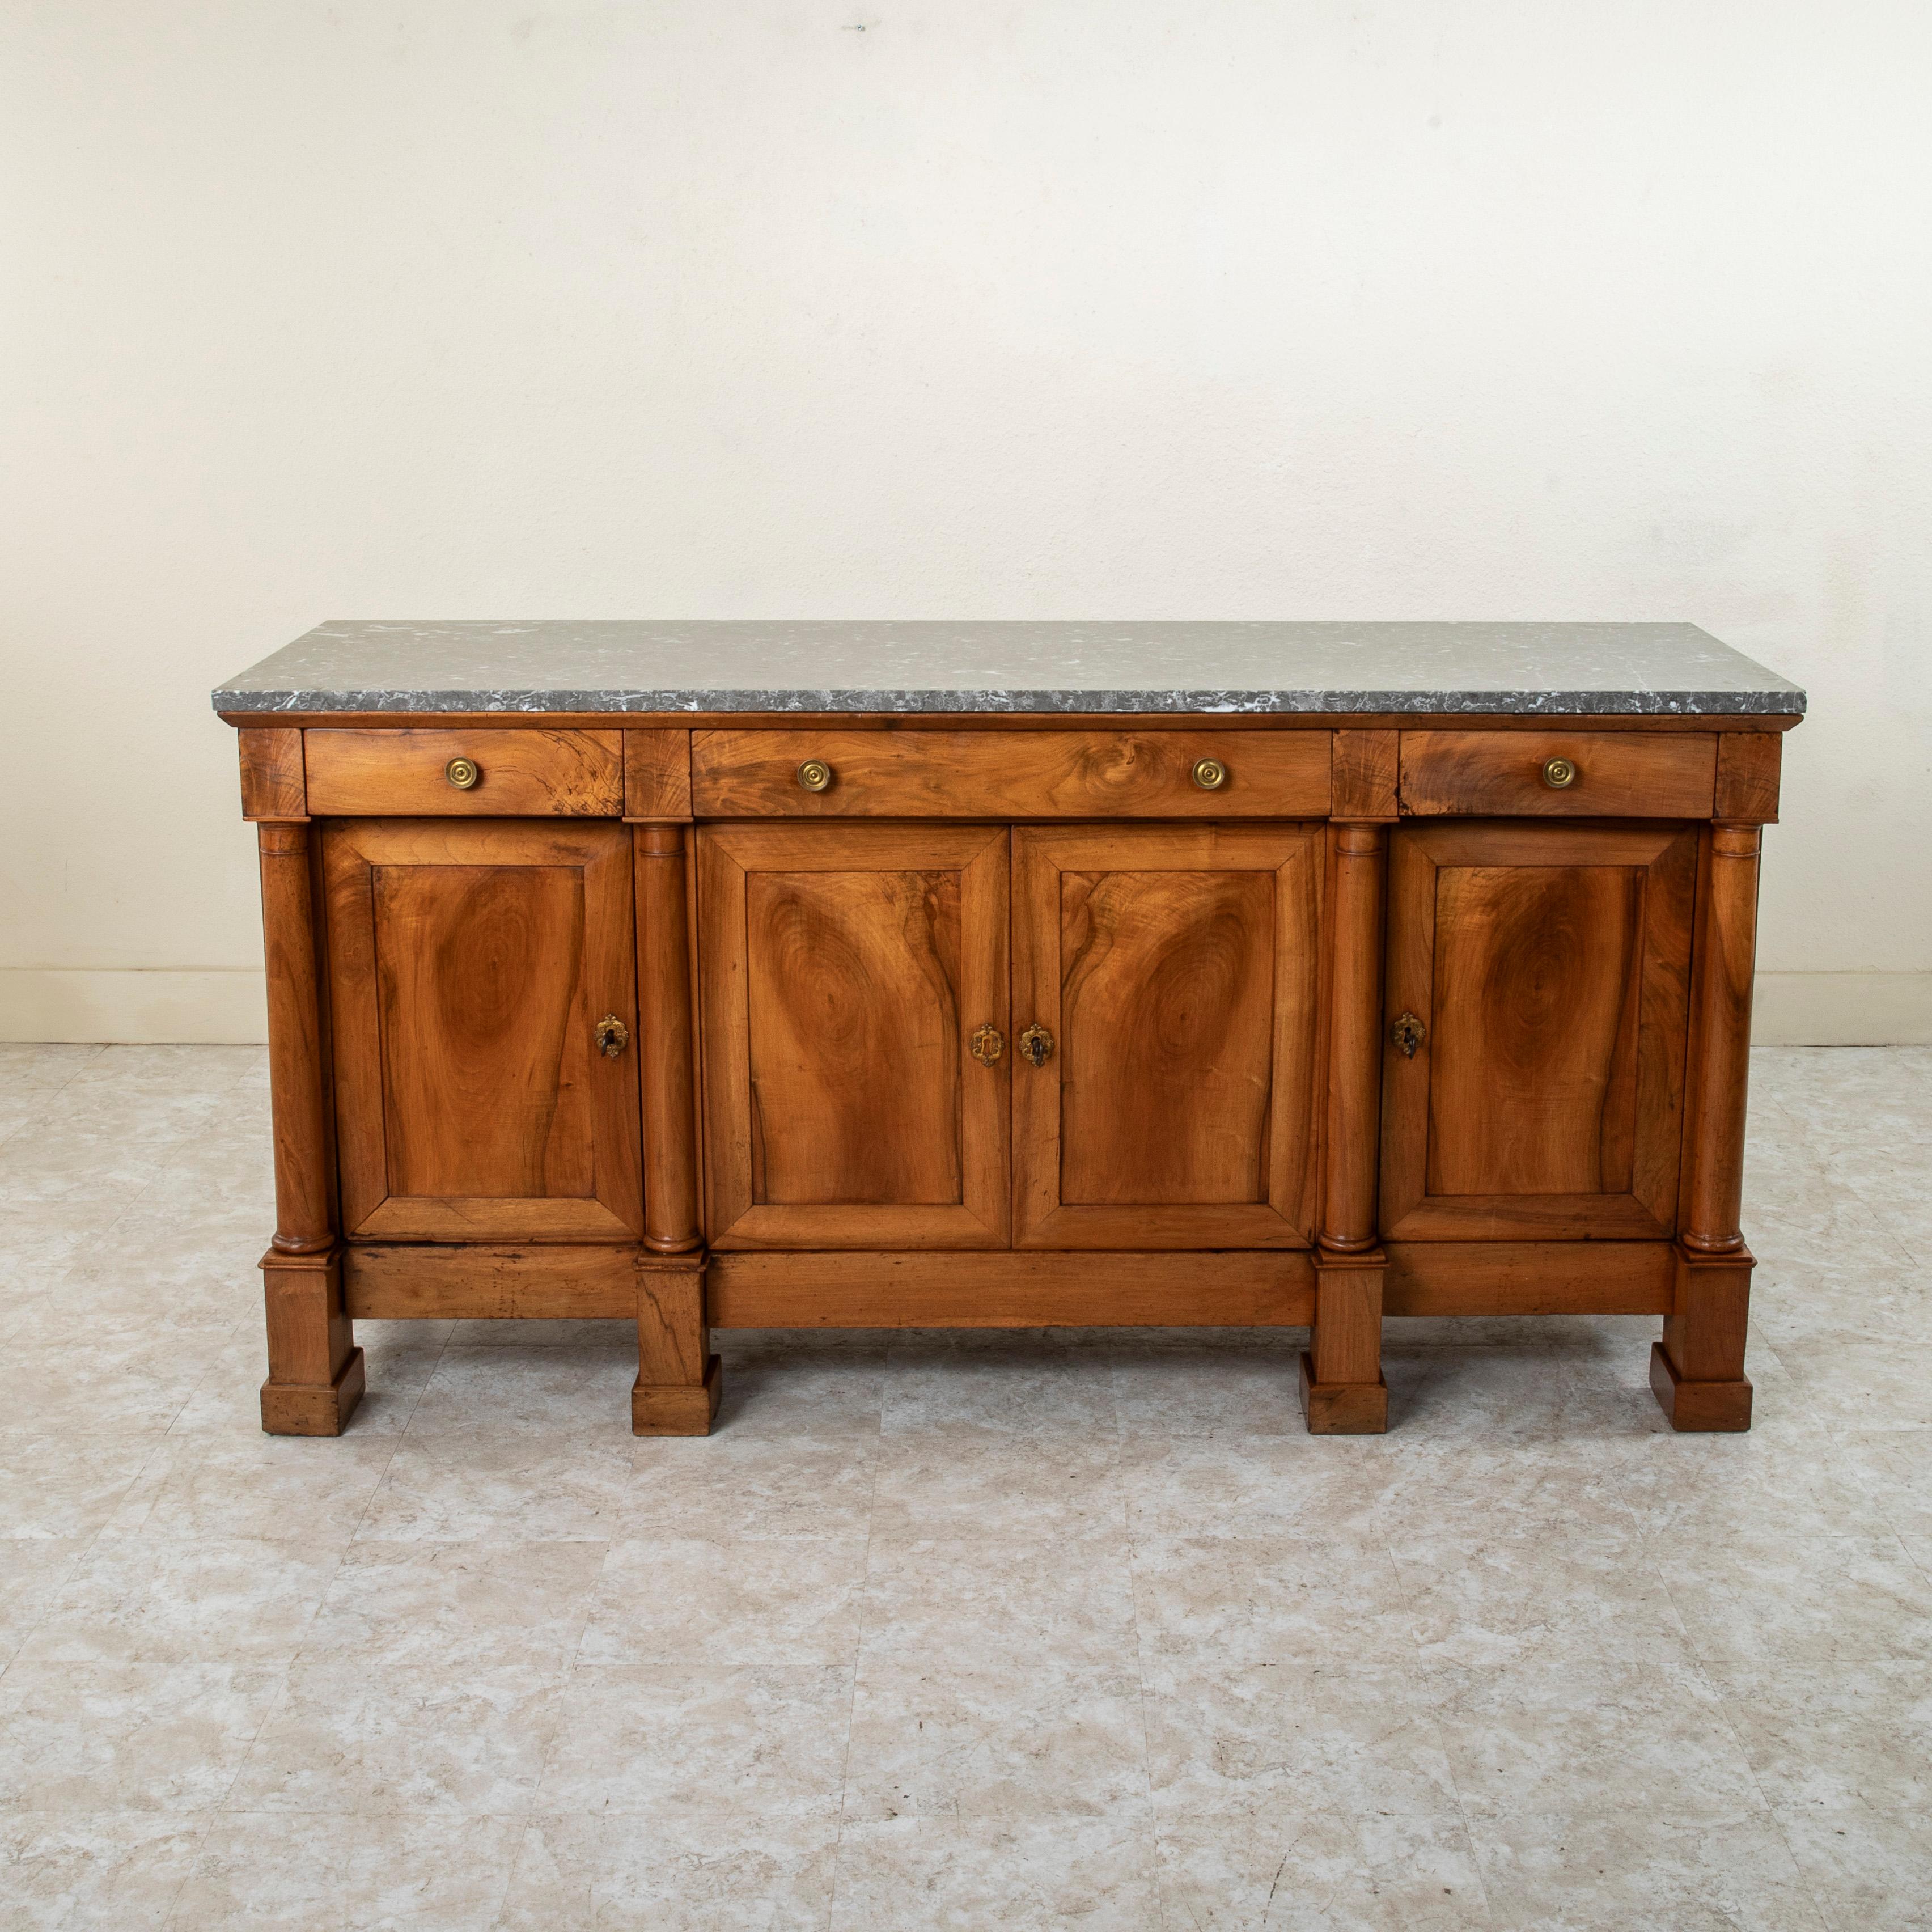 This early nineteenth century French Empire period enfilade, sideboard, or buffet features a grey marble top and is constructed of solid walnut. Four columns flank the doors of the facade. Three drawers of dovetail construction fit into the apron